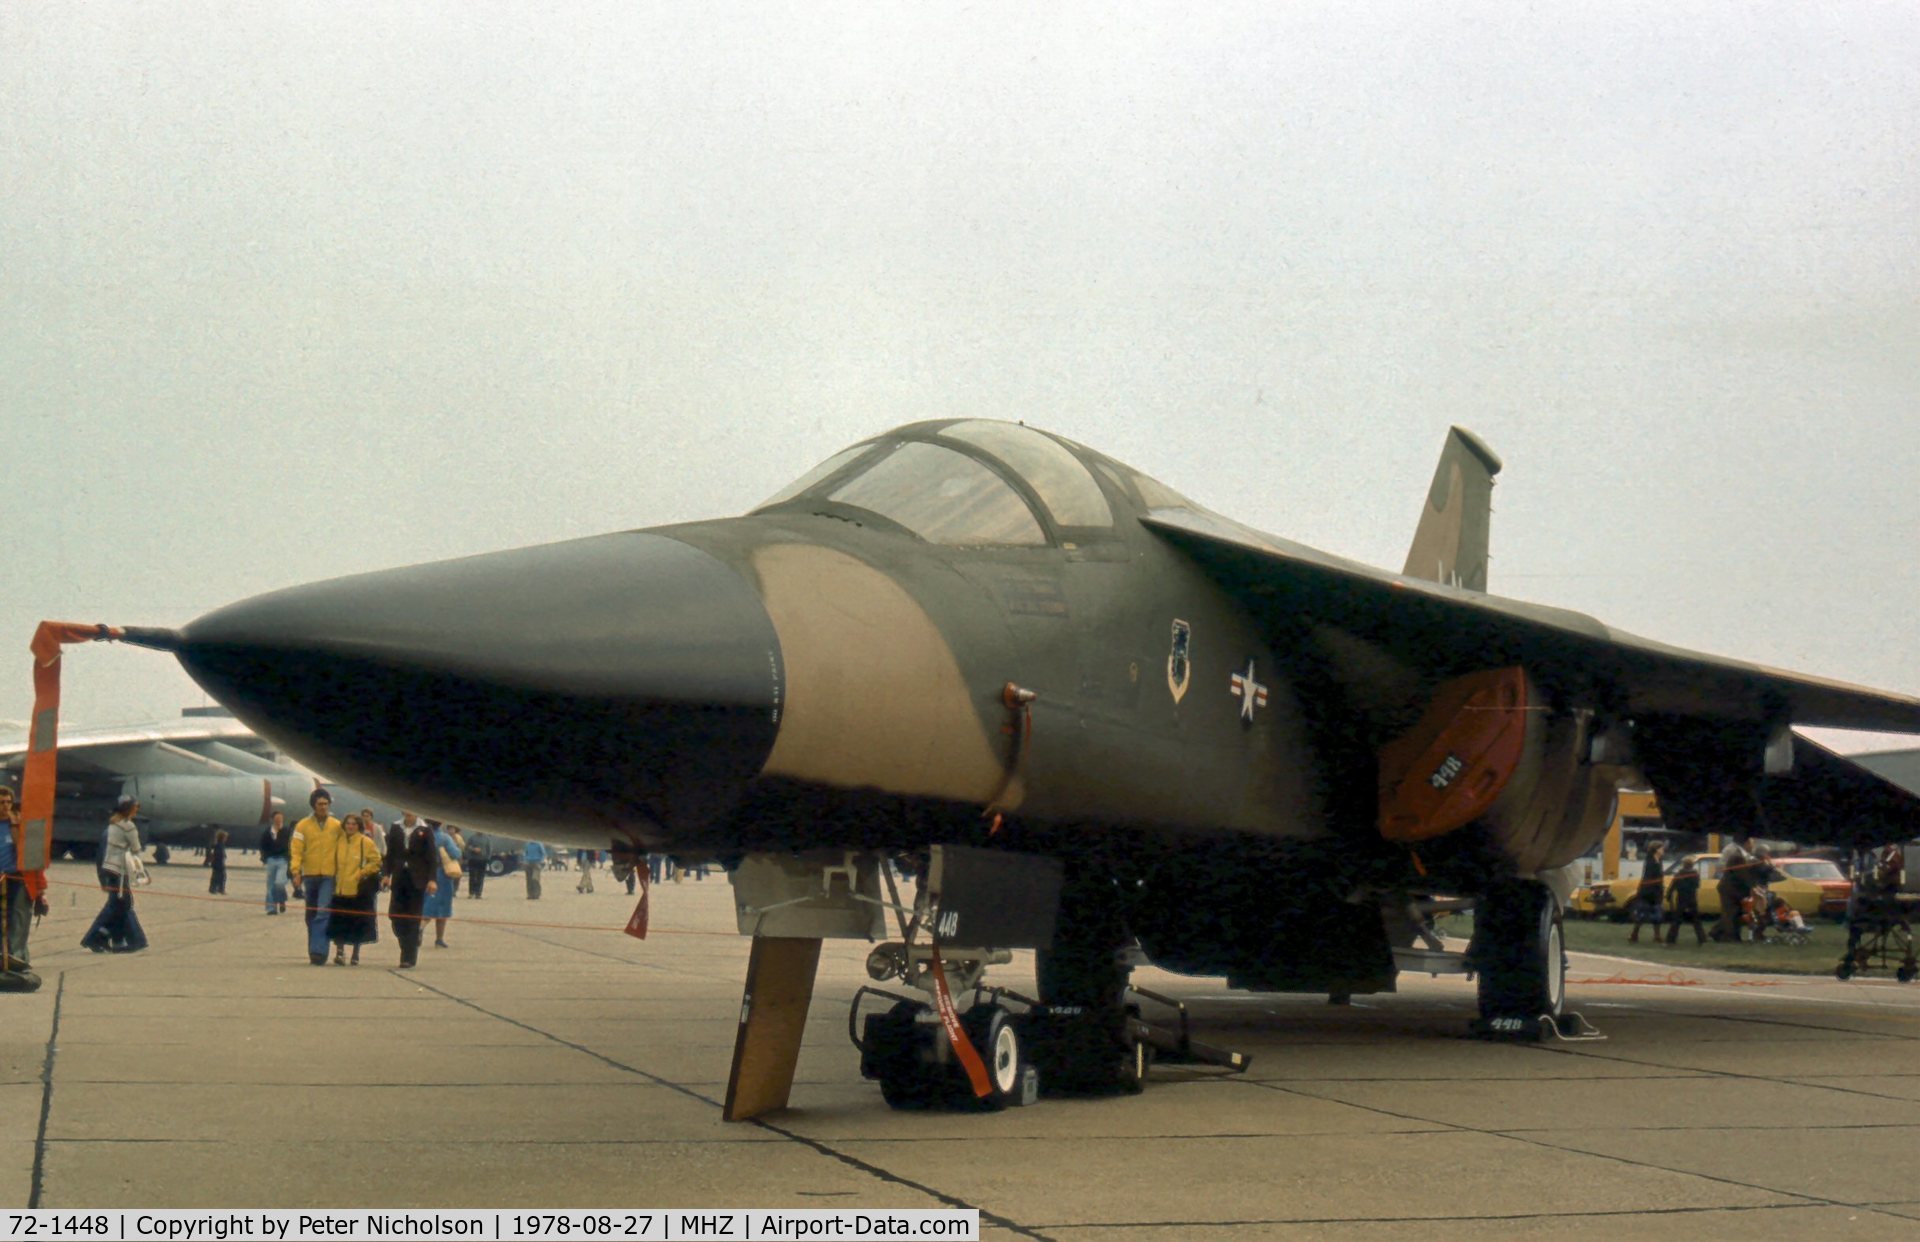 72-1448, 1972 General Dynamics F-111F Aardvark C/N E2-78, F-111F of 495th Tactical Fighter Squadron/48th Tactical Fighter Wing on display at the 1978 Mildenhall Air Fete.